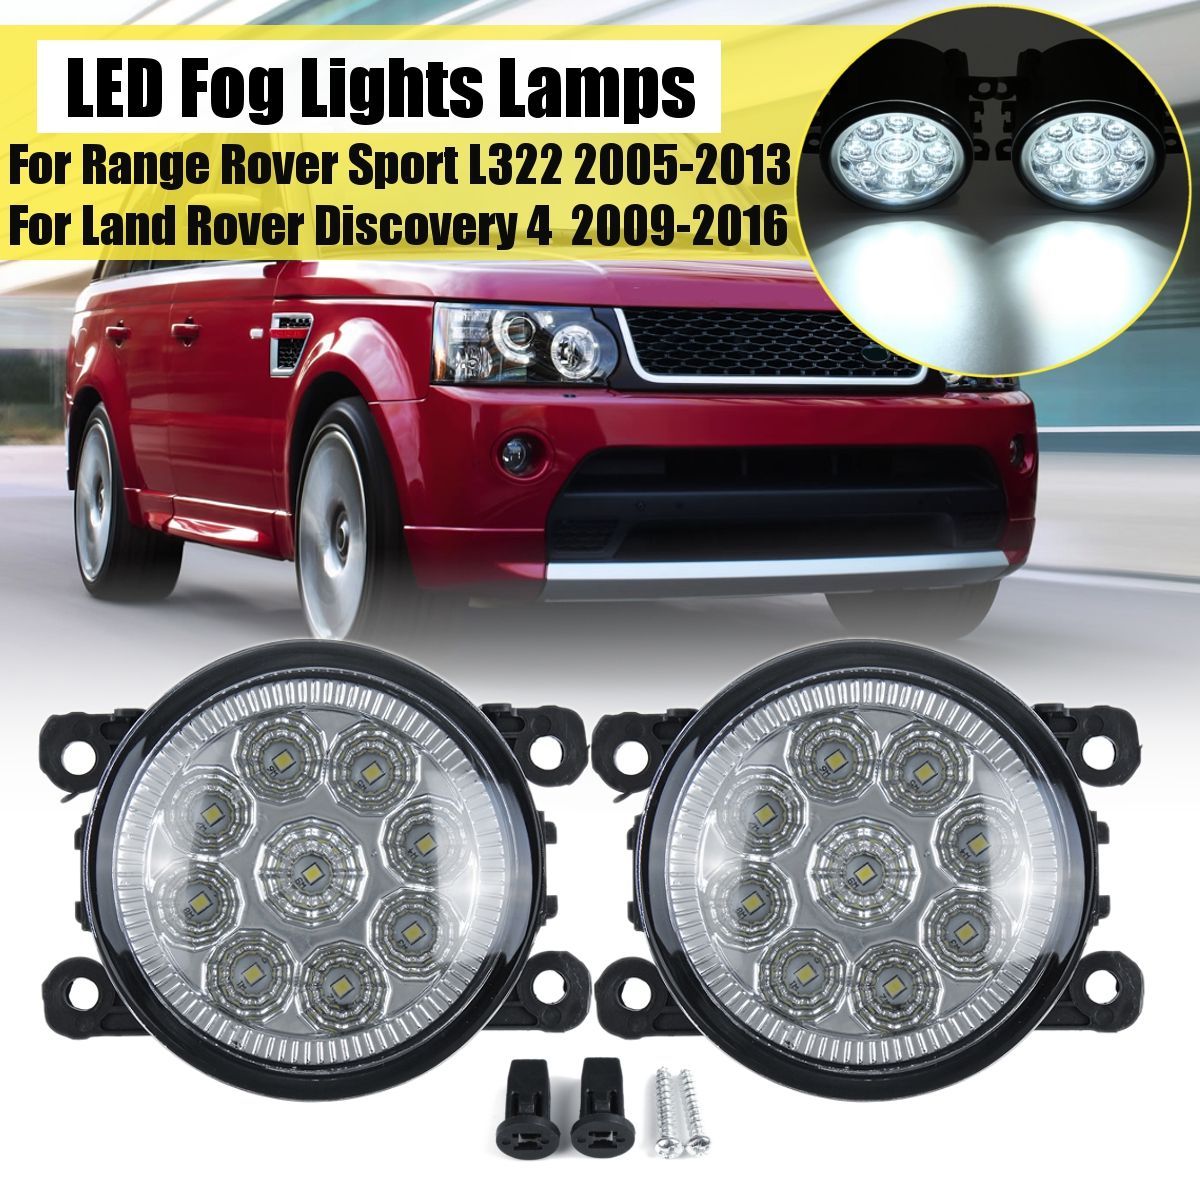 Pair-Car-Front-LED-Fog-Lights-Lamps-with-H11-Bulbs-White-For-Land-Rover-Discovery-4-Range-Rover-Spor-1609913